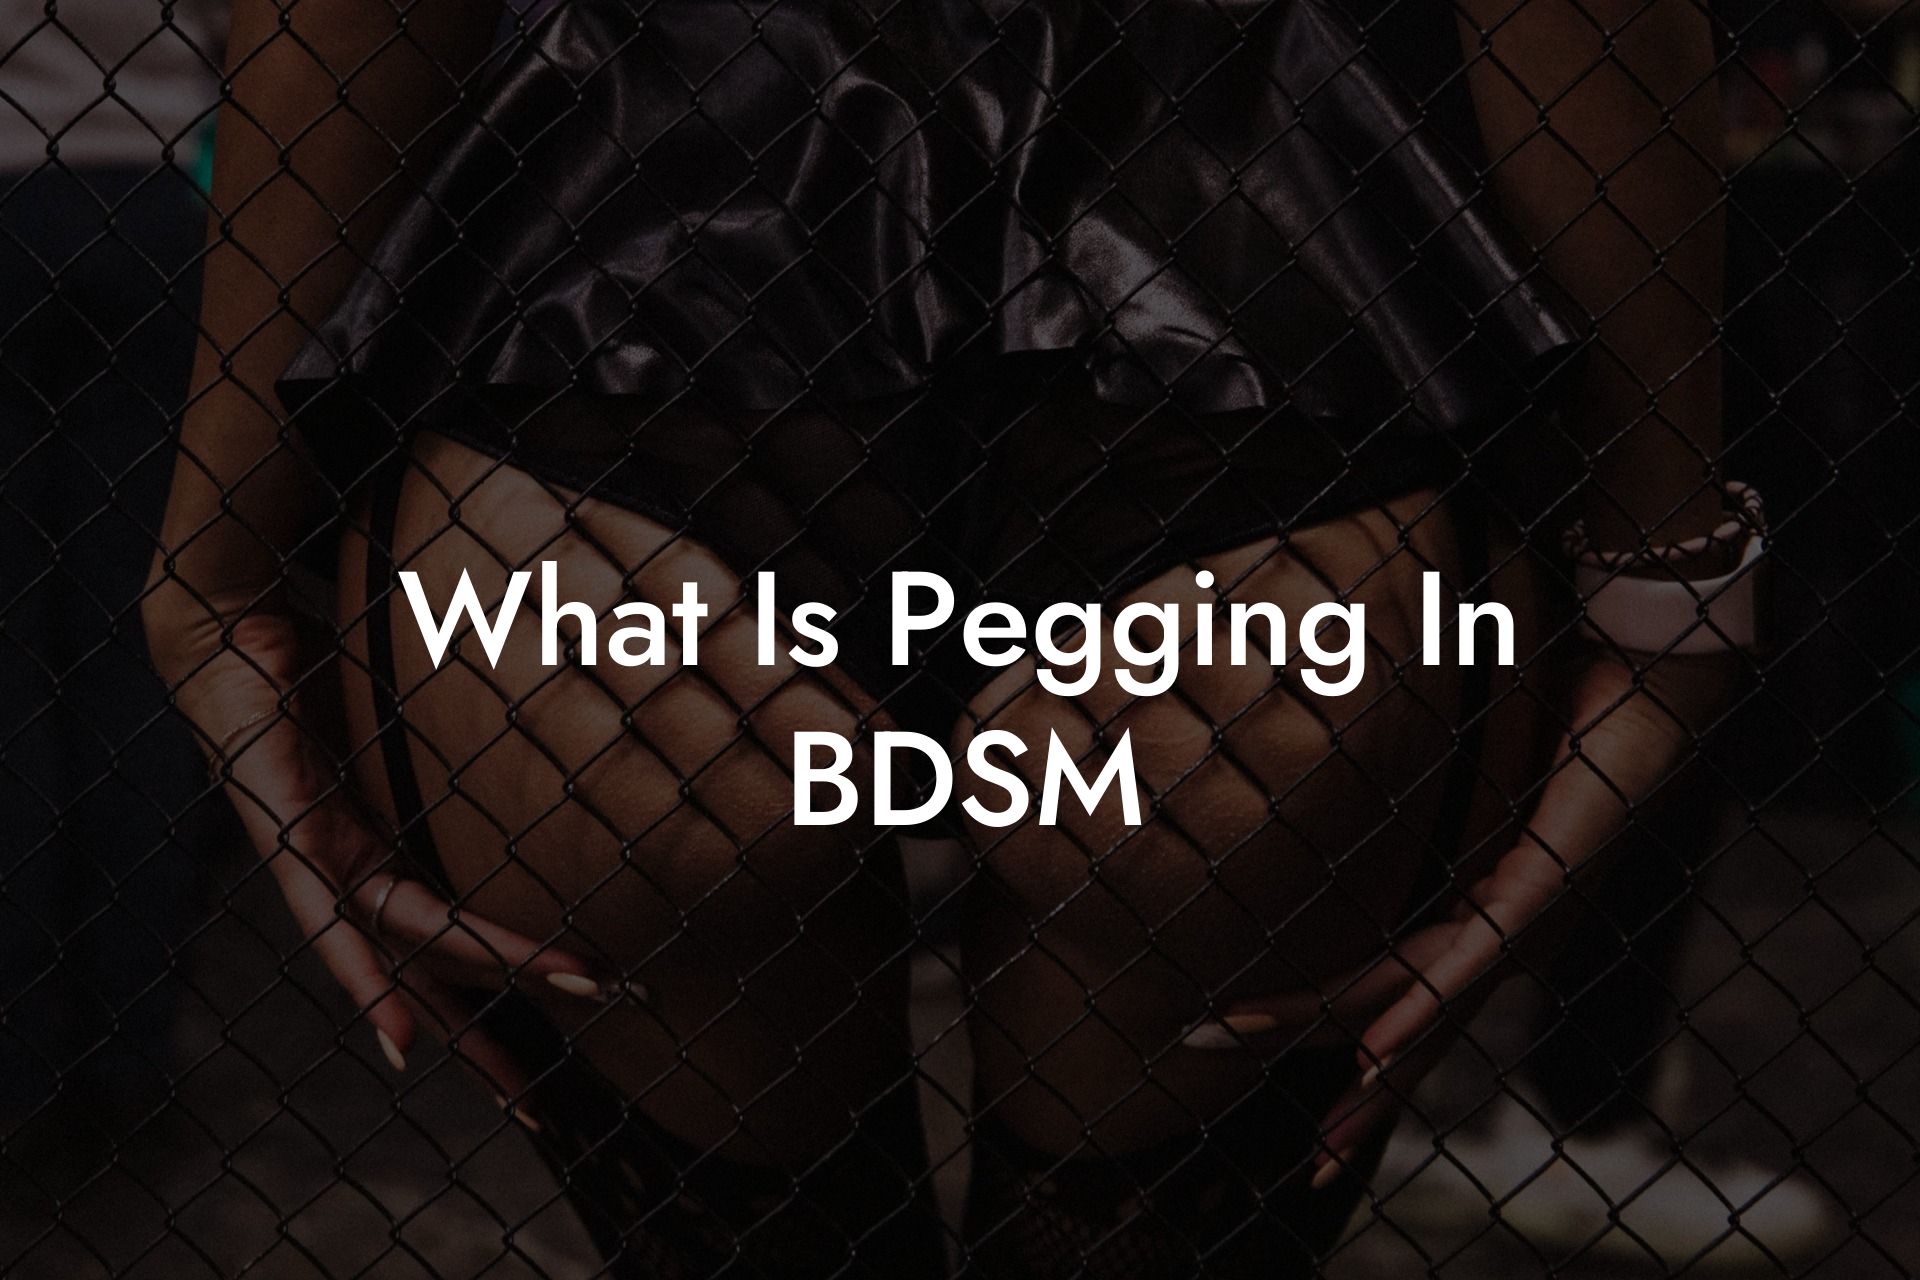 What Is Pegging In BDSM